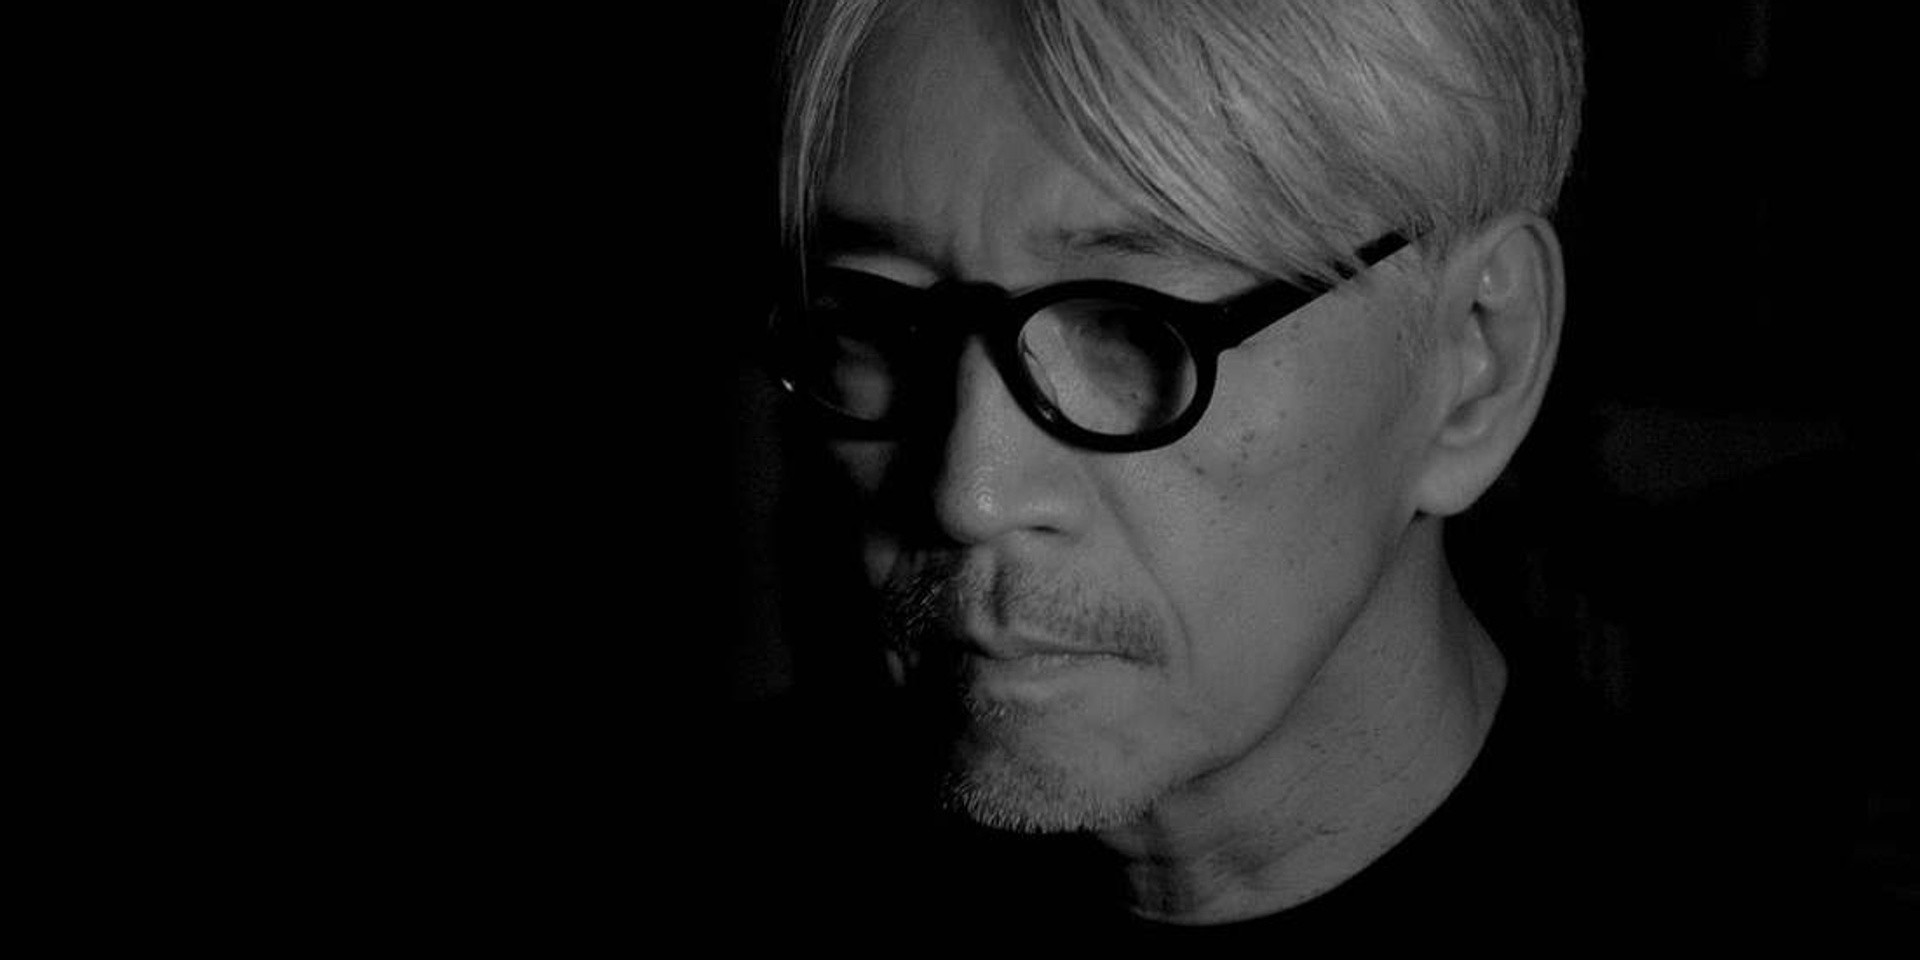 Ryuichi Sakamoto announces online piano solo concert in December, hosted on MUSIC/SLASH with “highest sound quality ever developed in the industry”